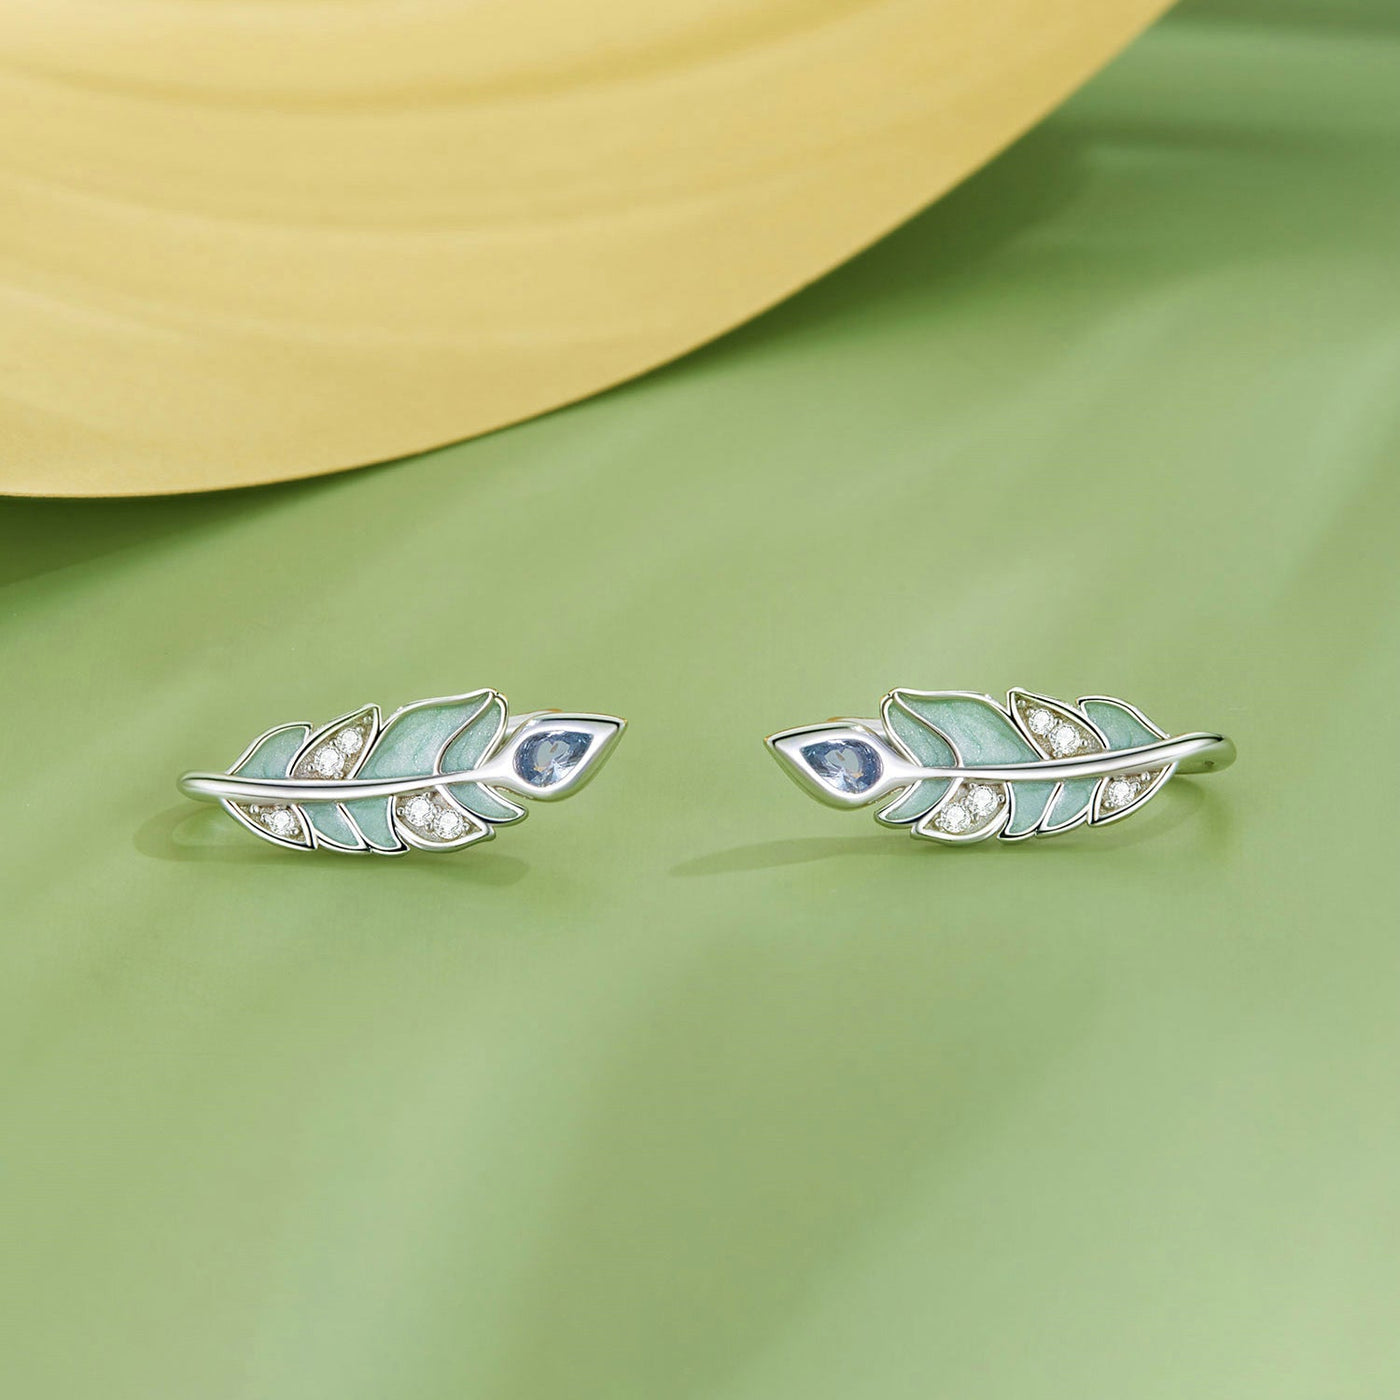 Mint Feather Earrings - The Silver Goose SA